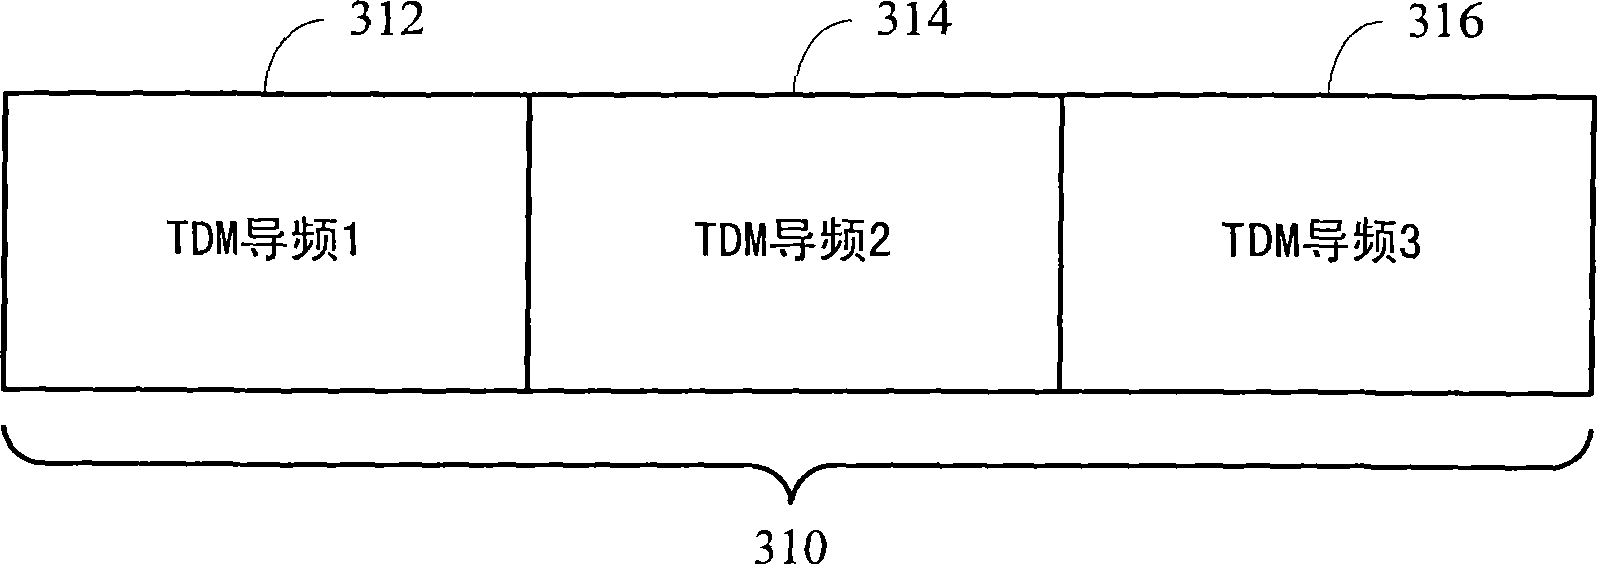 Signal acquisition in a wireless communication system